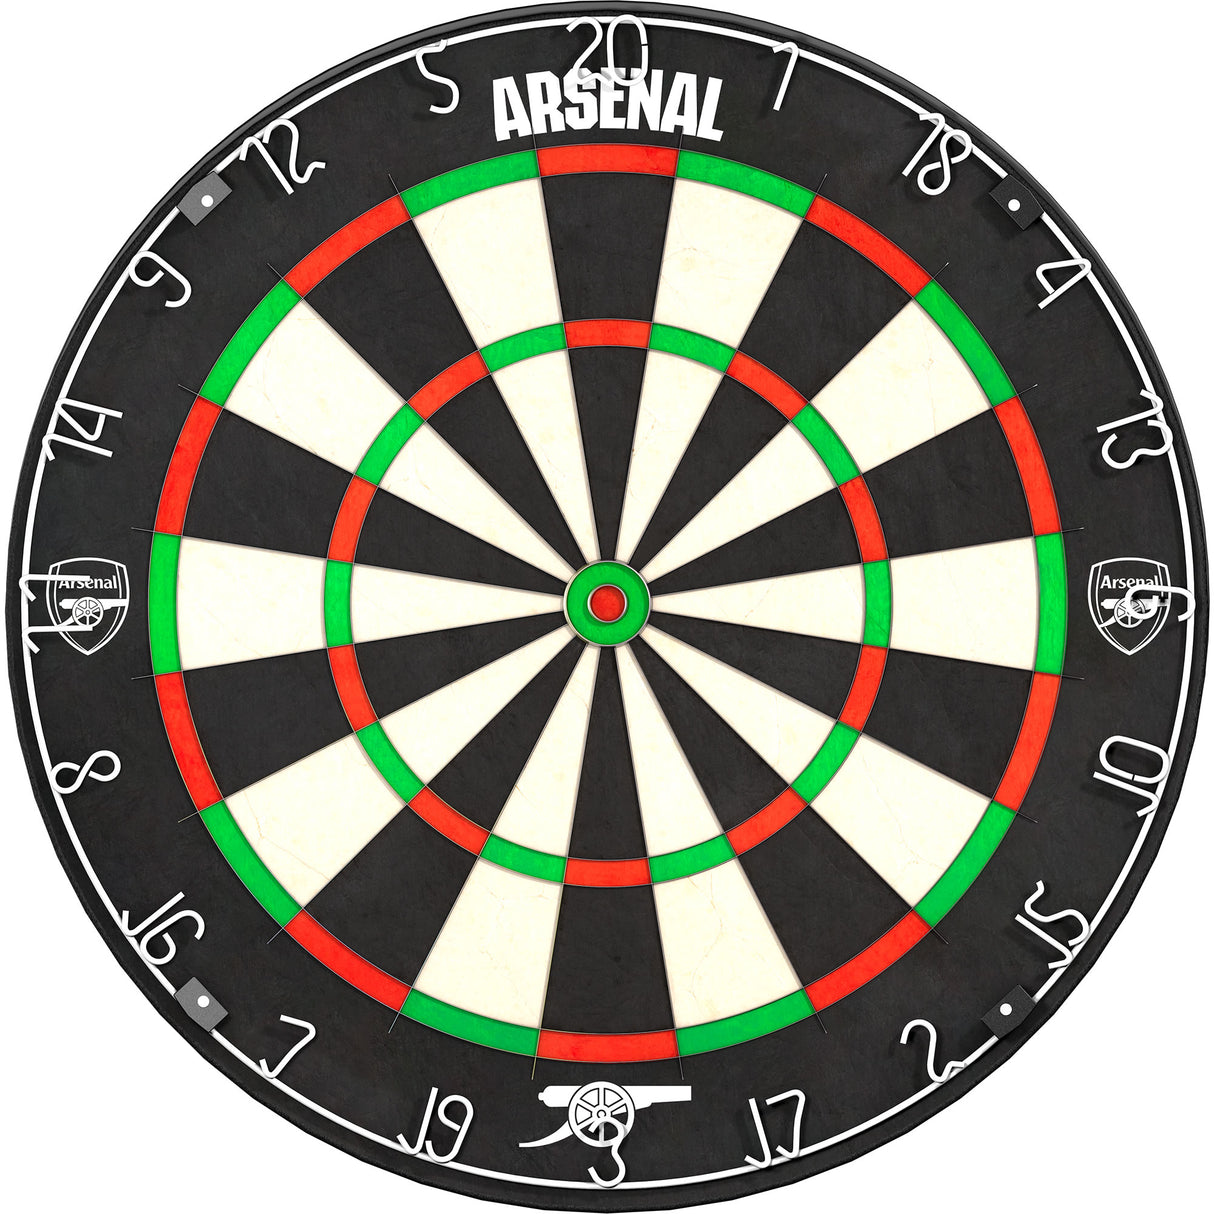 Arsenal FC Dartboard - Professional Level - Official Licensed - The Gunners - Mono Crest